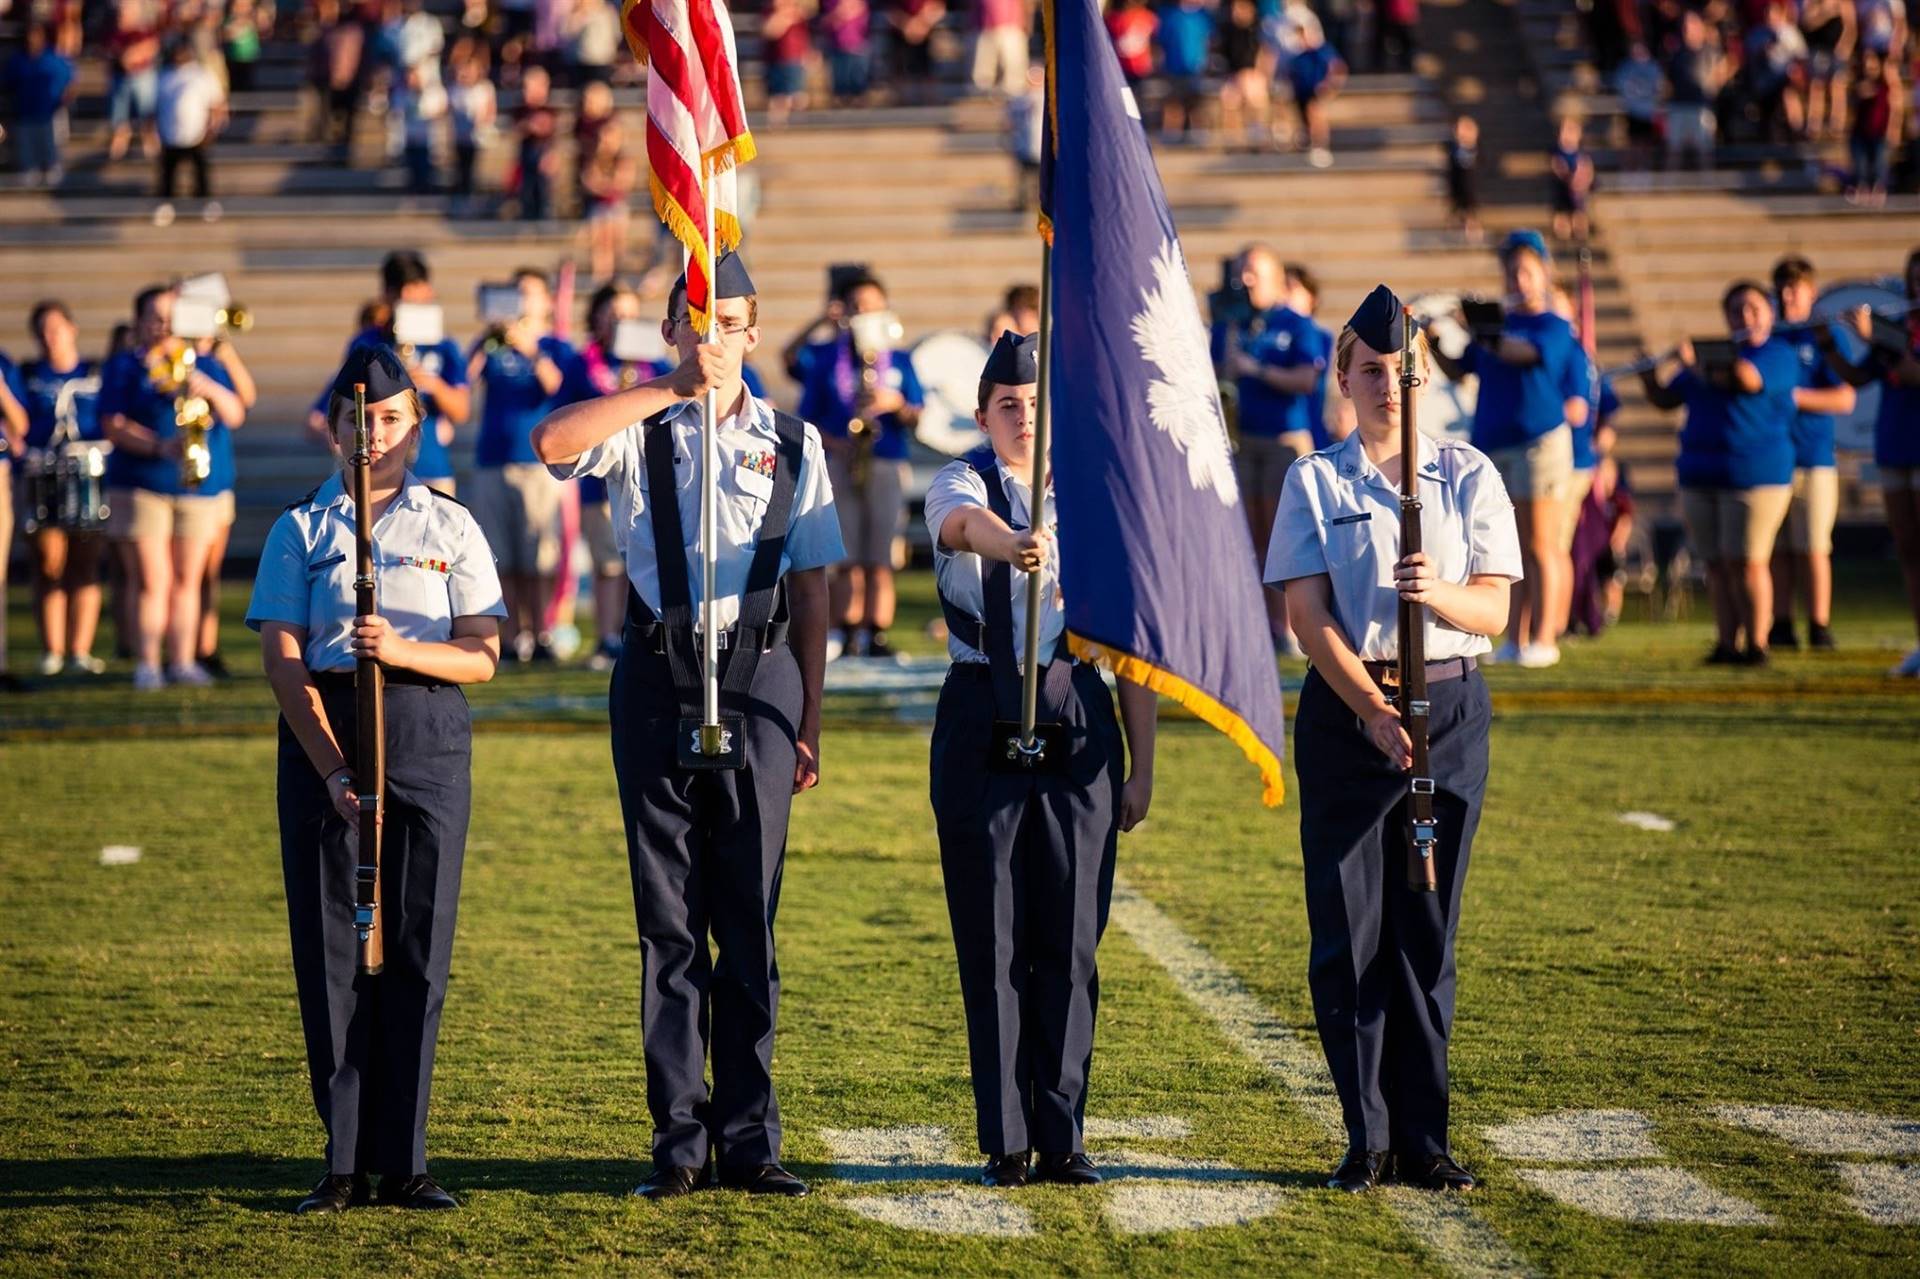 JROTC members holding flags and firearms on the football field